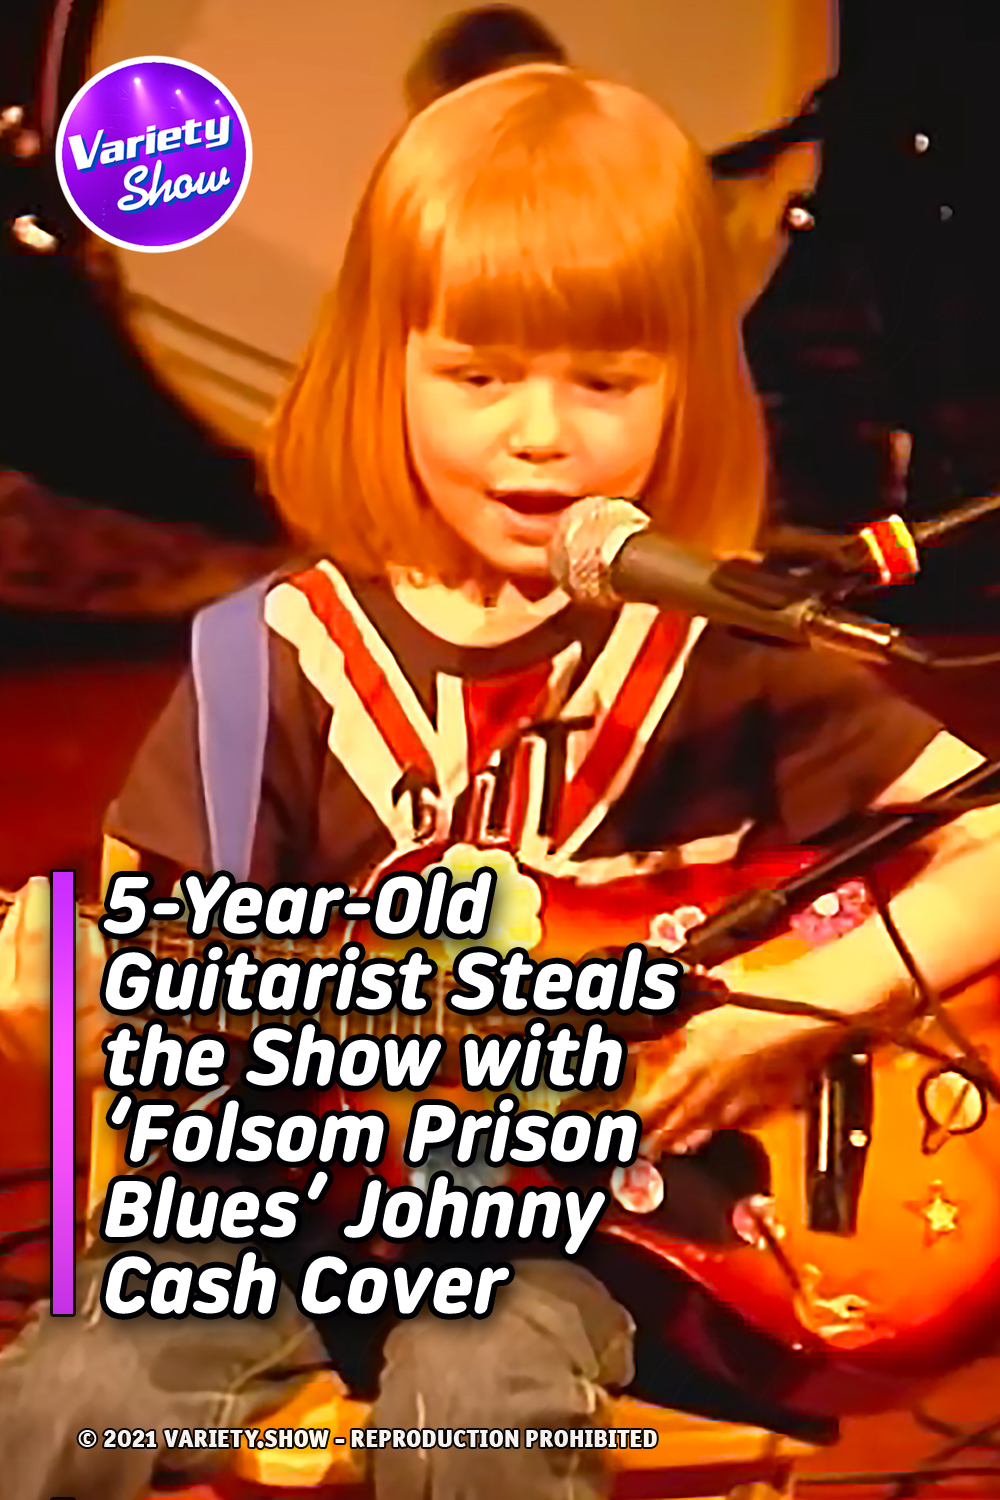 5-Year-Old Guitarist Steals the Show with ‘Folsom Prison Blues’ Johnny Cash Cover